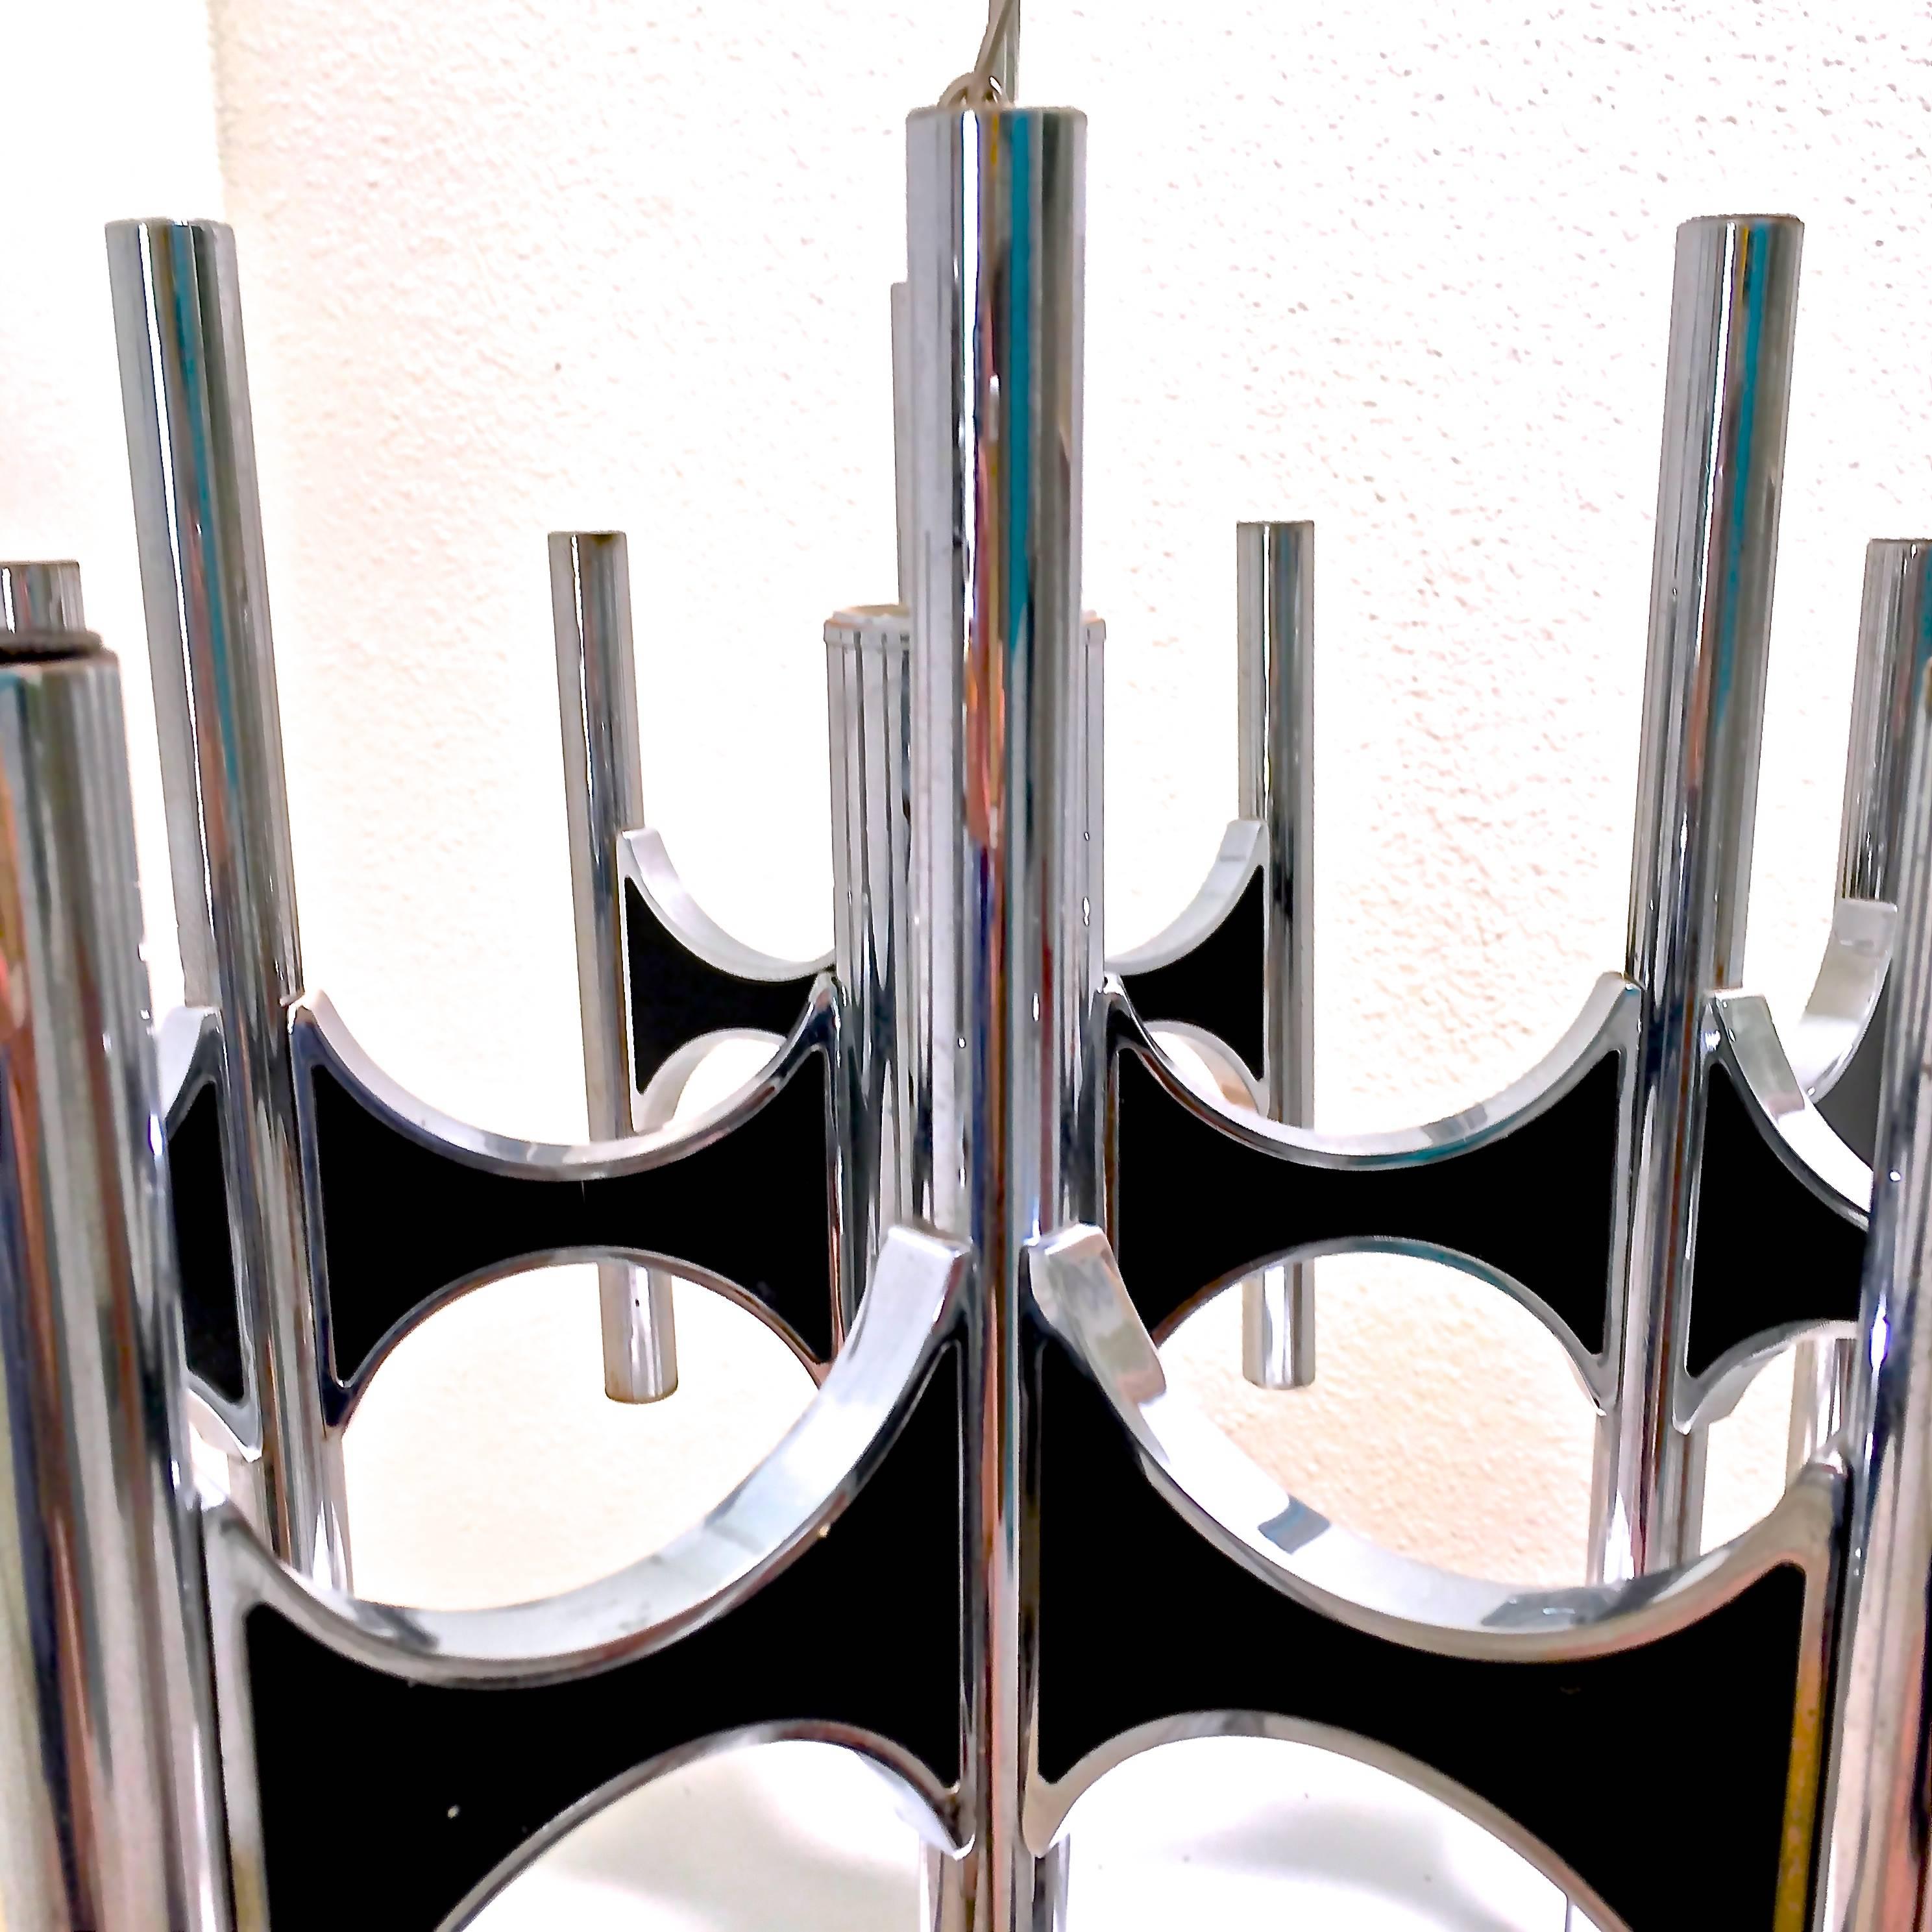 1960s-era Mid-Century Modern twelve-arm chandelier by Gaetano Sciolari is both sleek and dramatic. Chrome tubes are connected w/black enameled buttresses to accommodate 24 bulbs for upward and downward lighting.